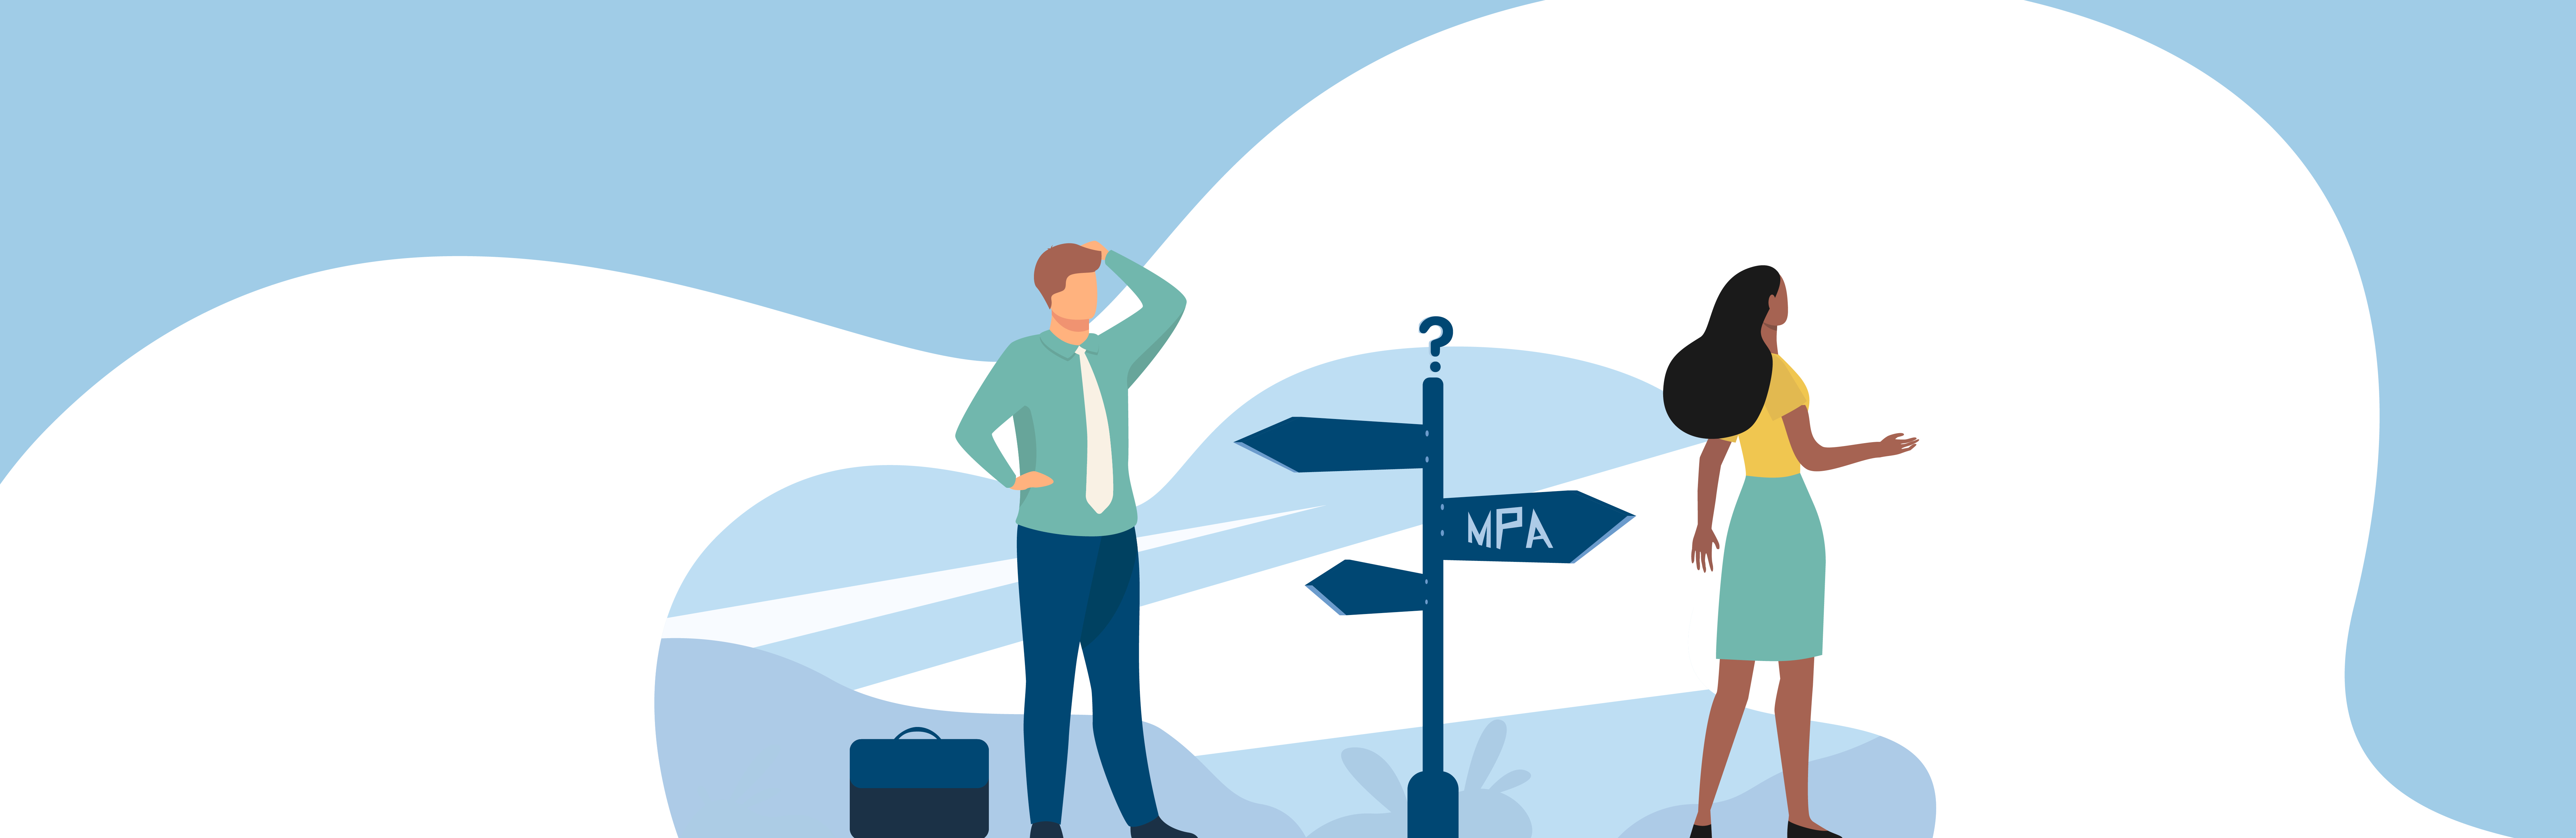 illustrated man and woman standing at a signpost that reads MPA